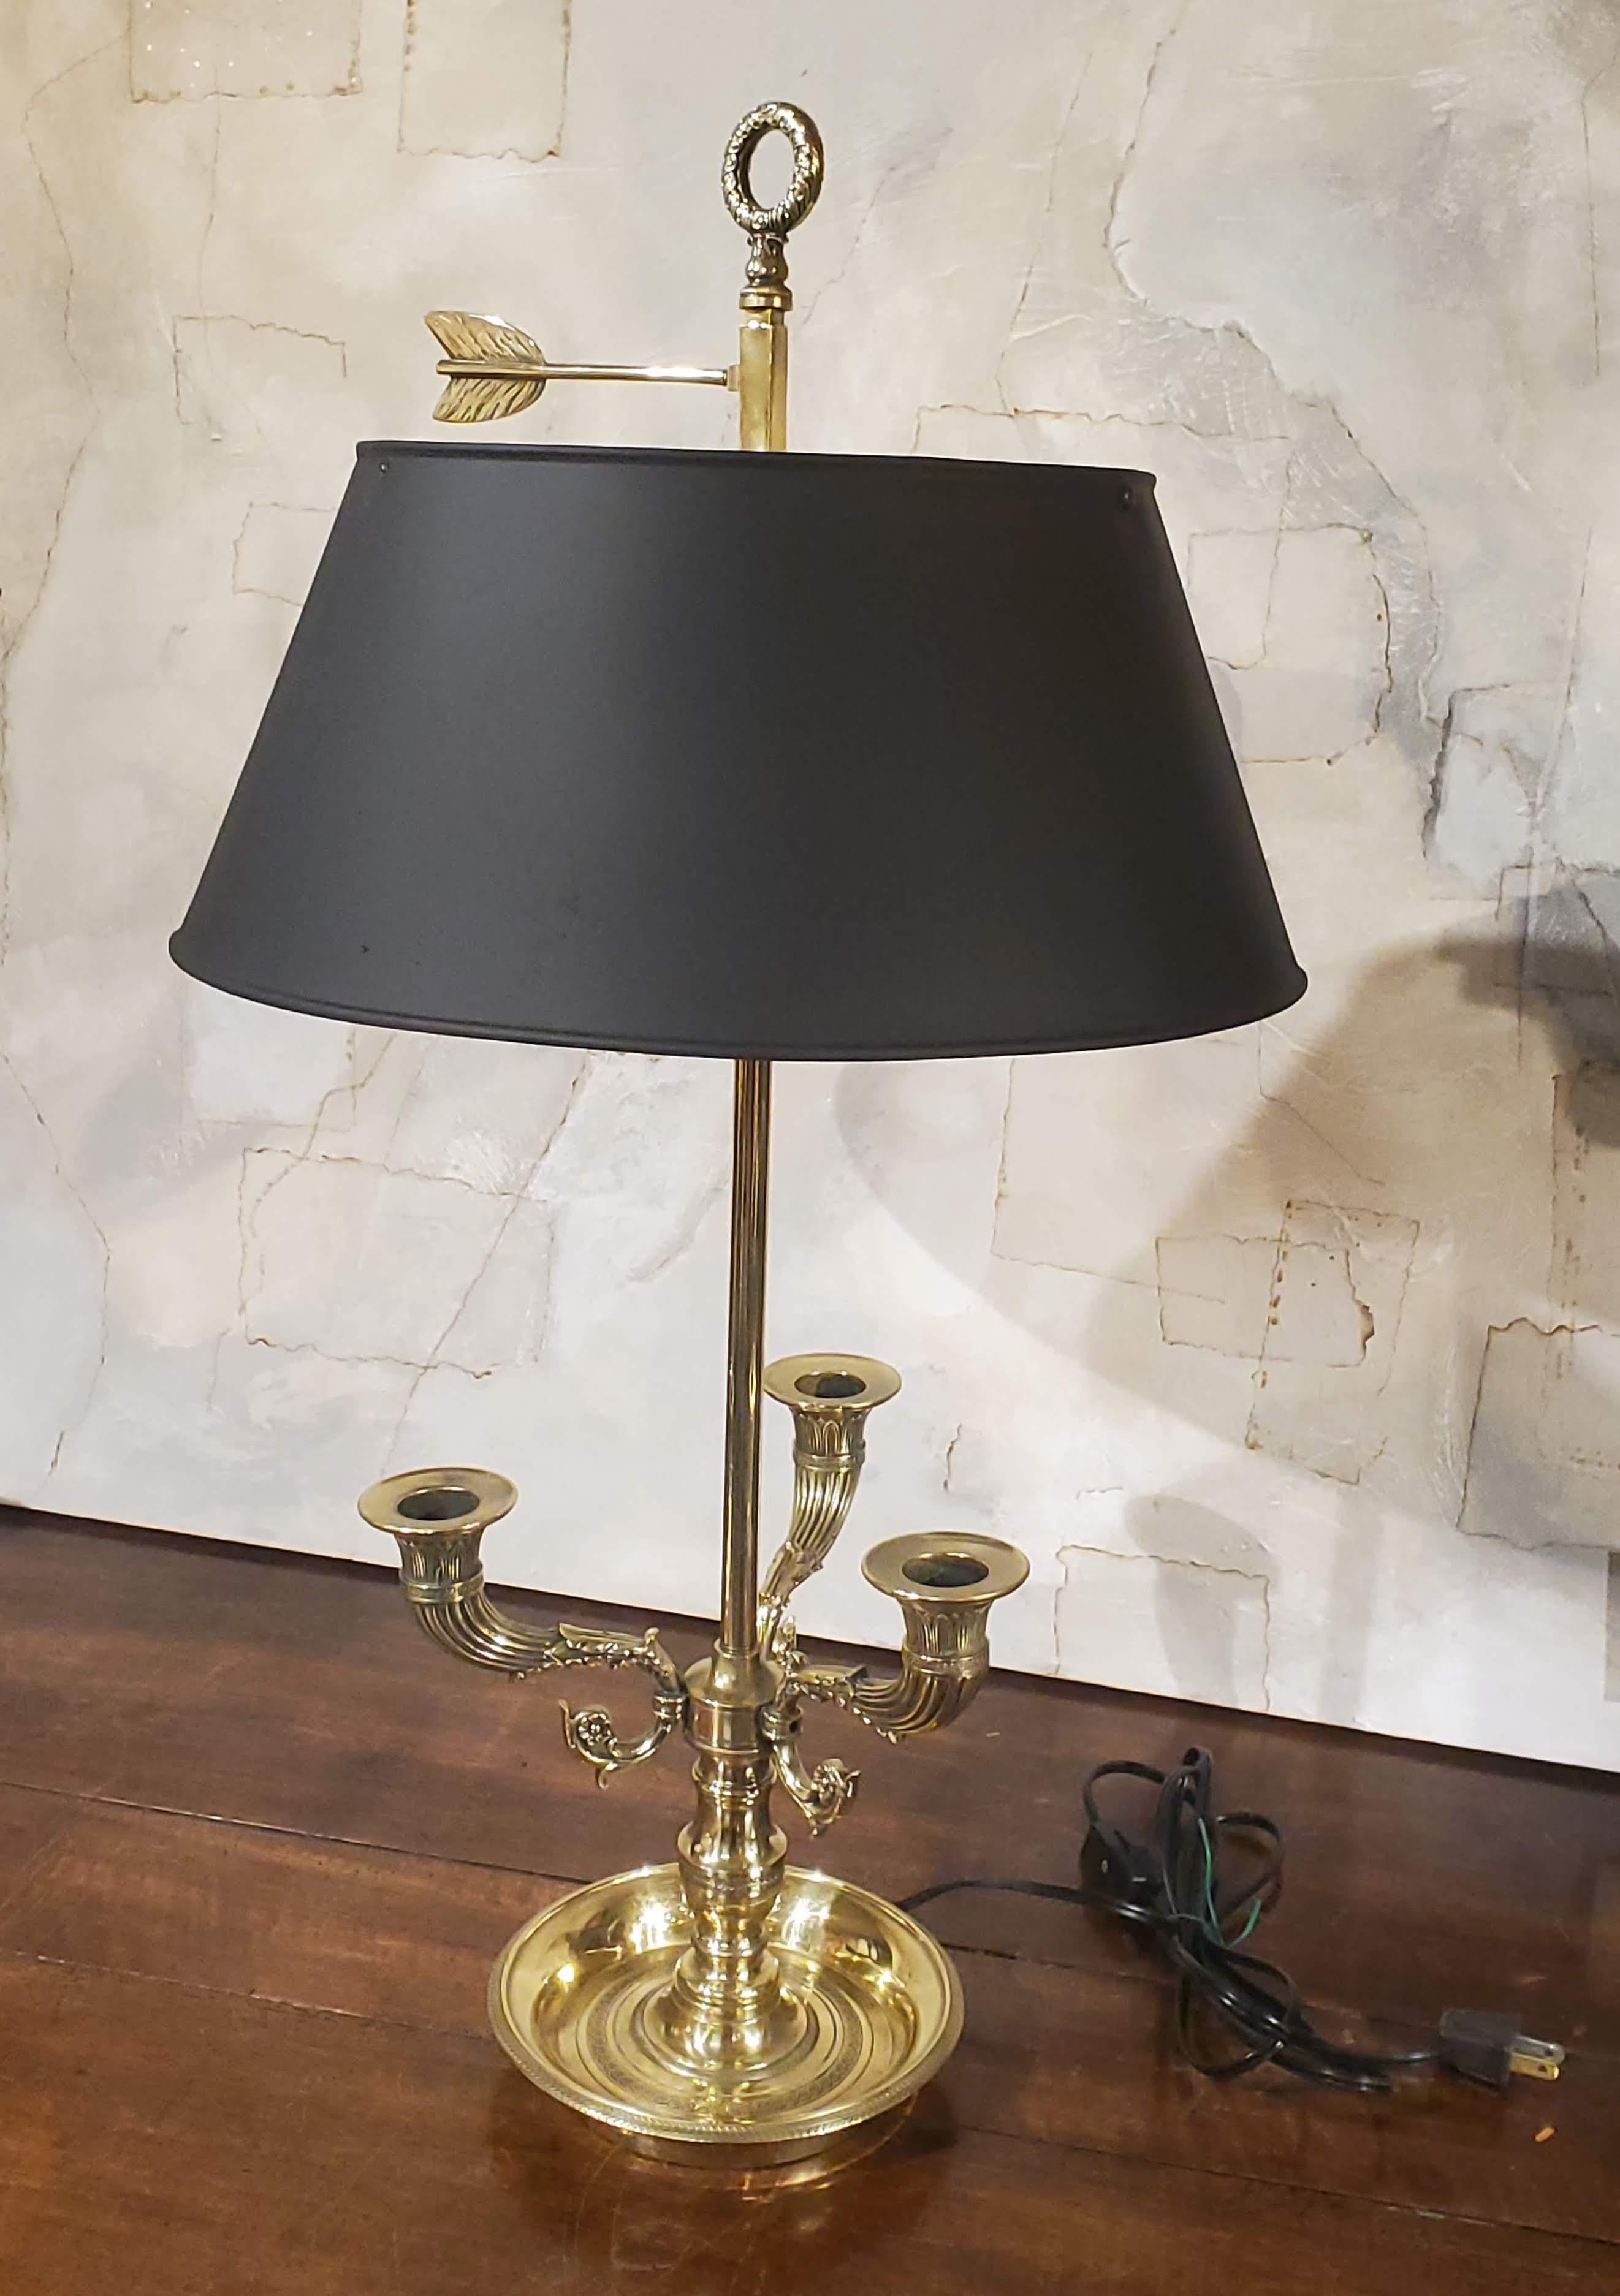 Early 19th Century French Provincial Bouillotte Lamp. In excellent condition with the original Tole shade. South of France, circa 1830.
Measures: 26” High   14” Diameter
